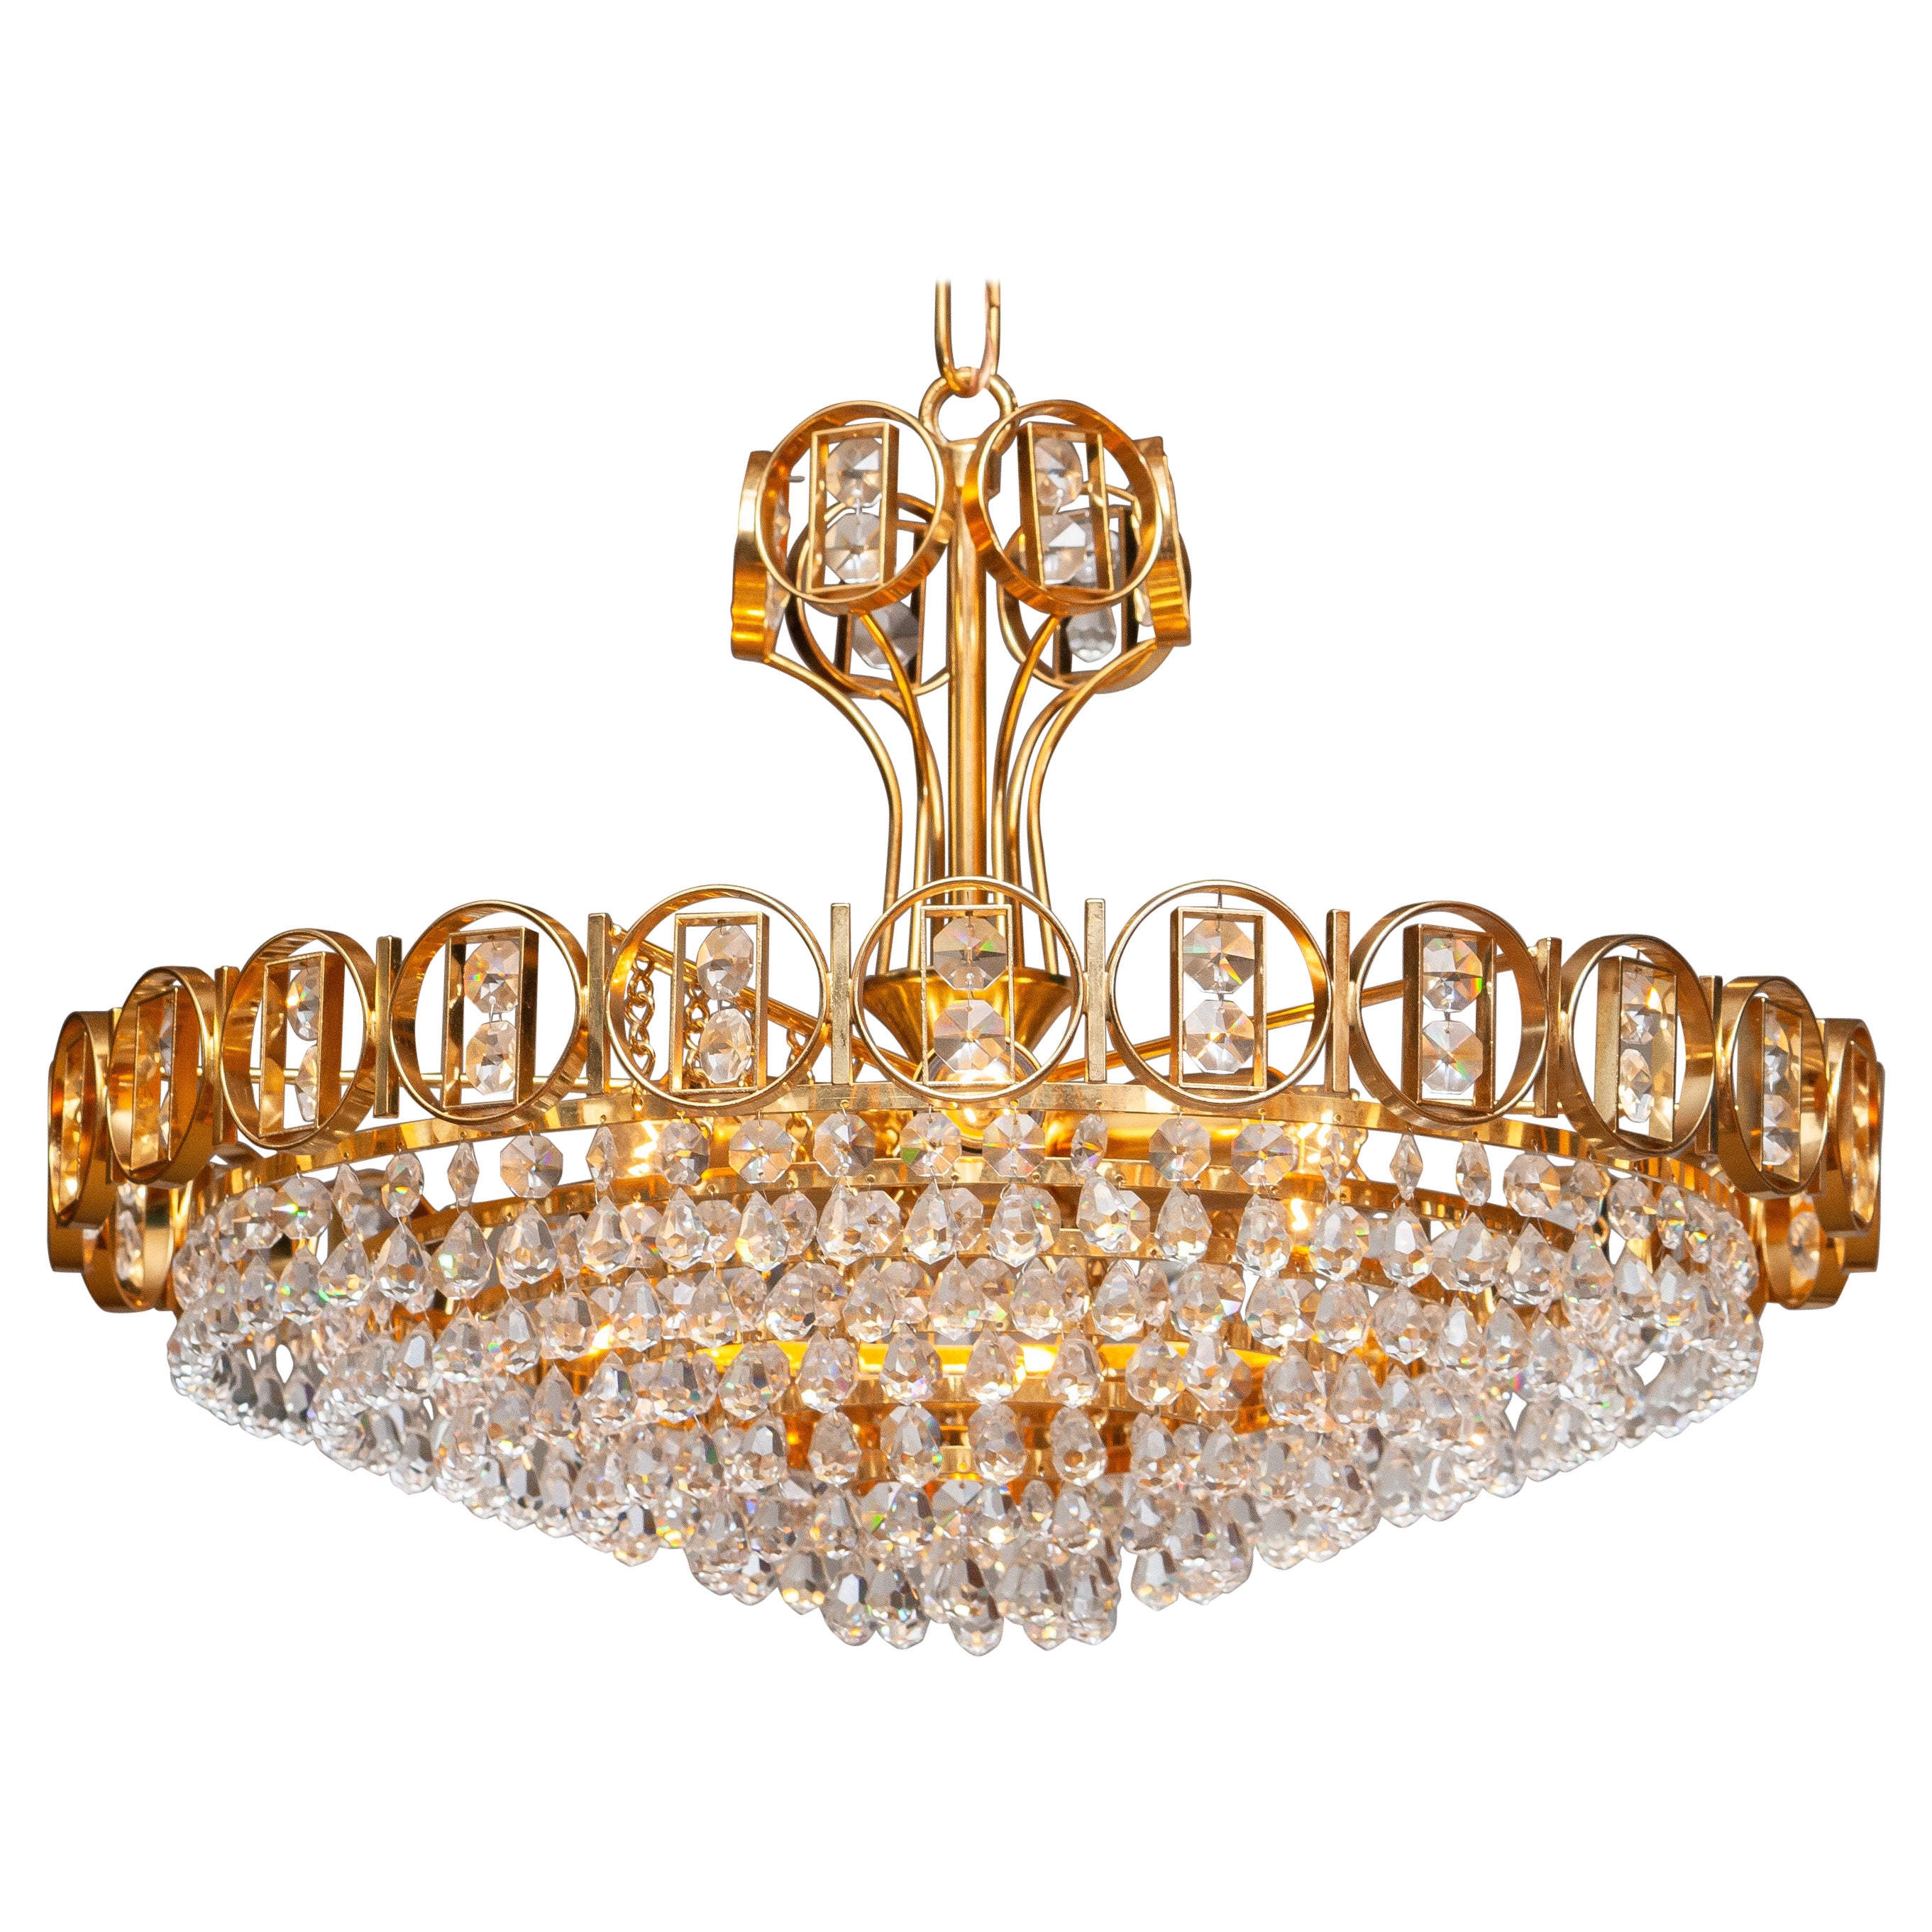 1970s, Gold-Plated Brass Chandelier with Faceted Crystals Made by Palwa, Germany